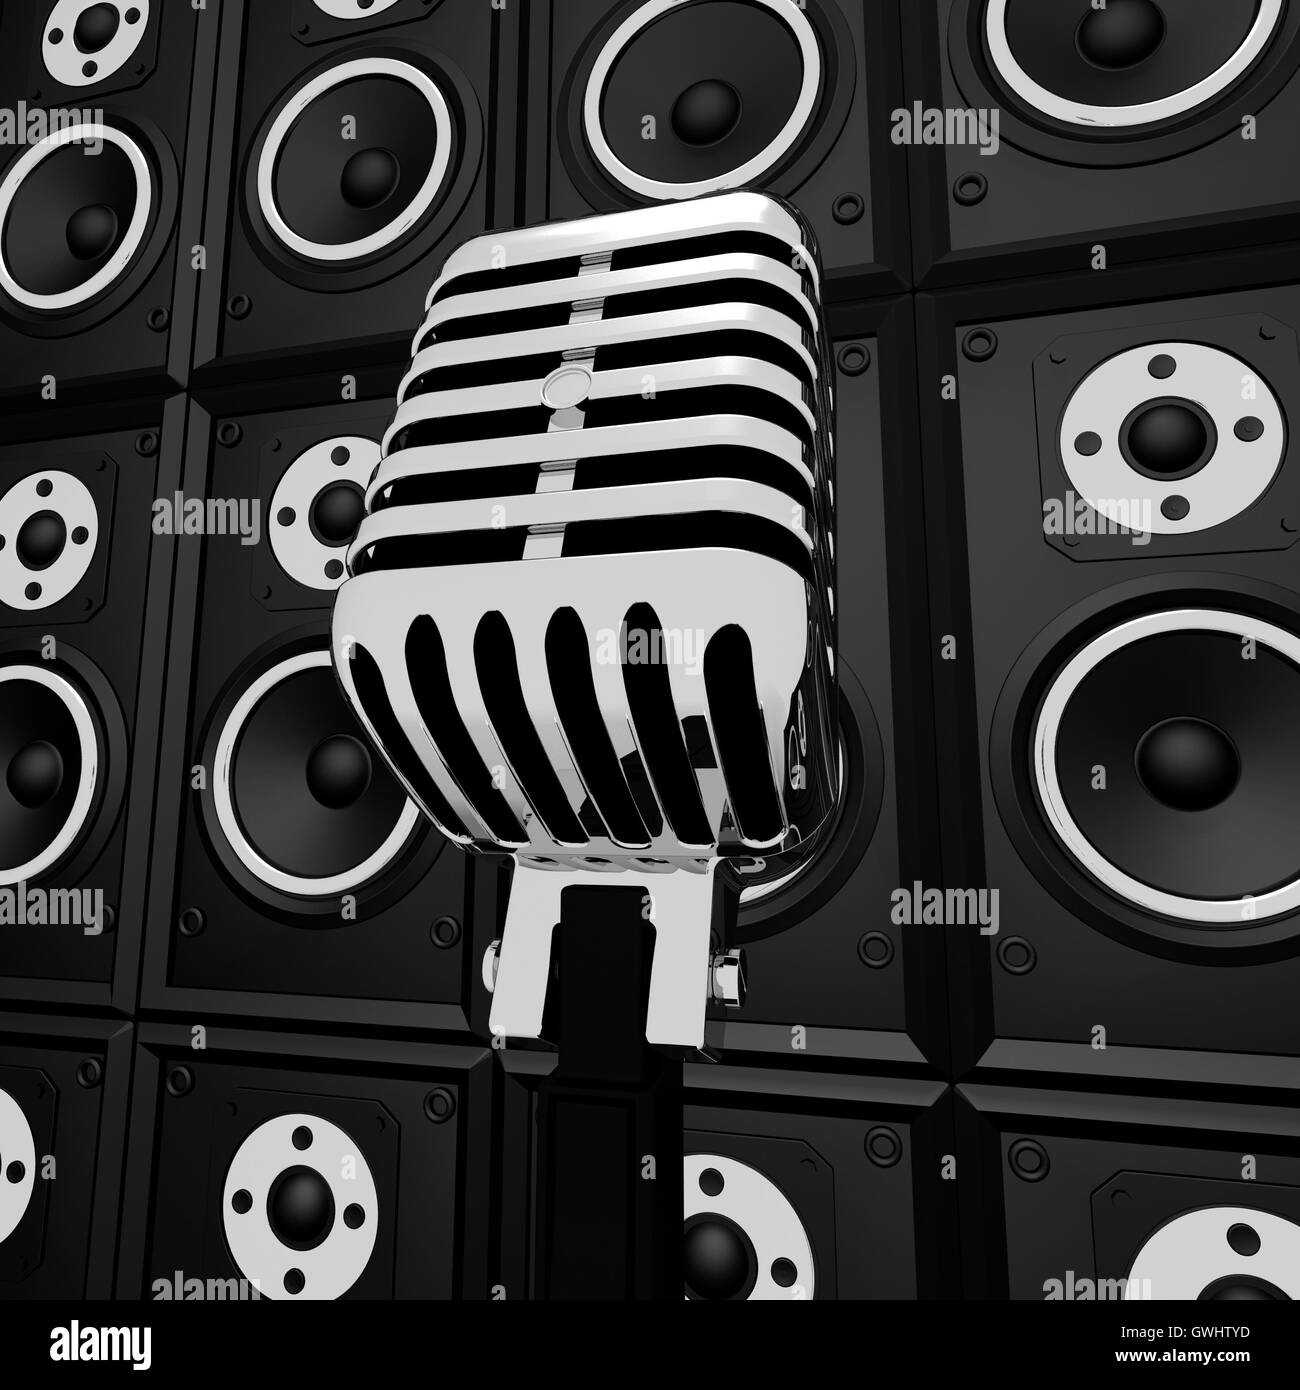 Microphone And Loud Speakers Shows Music Industry Concert Or Ent Stock Photo